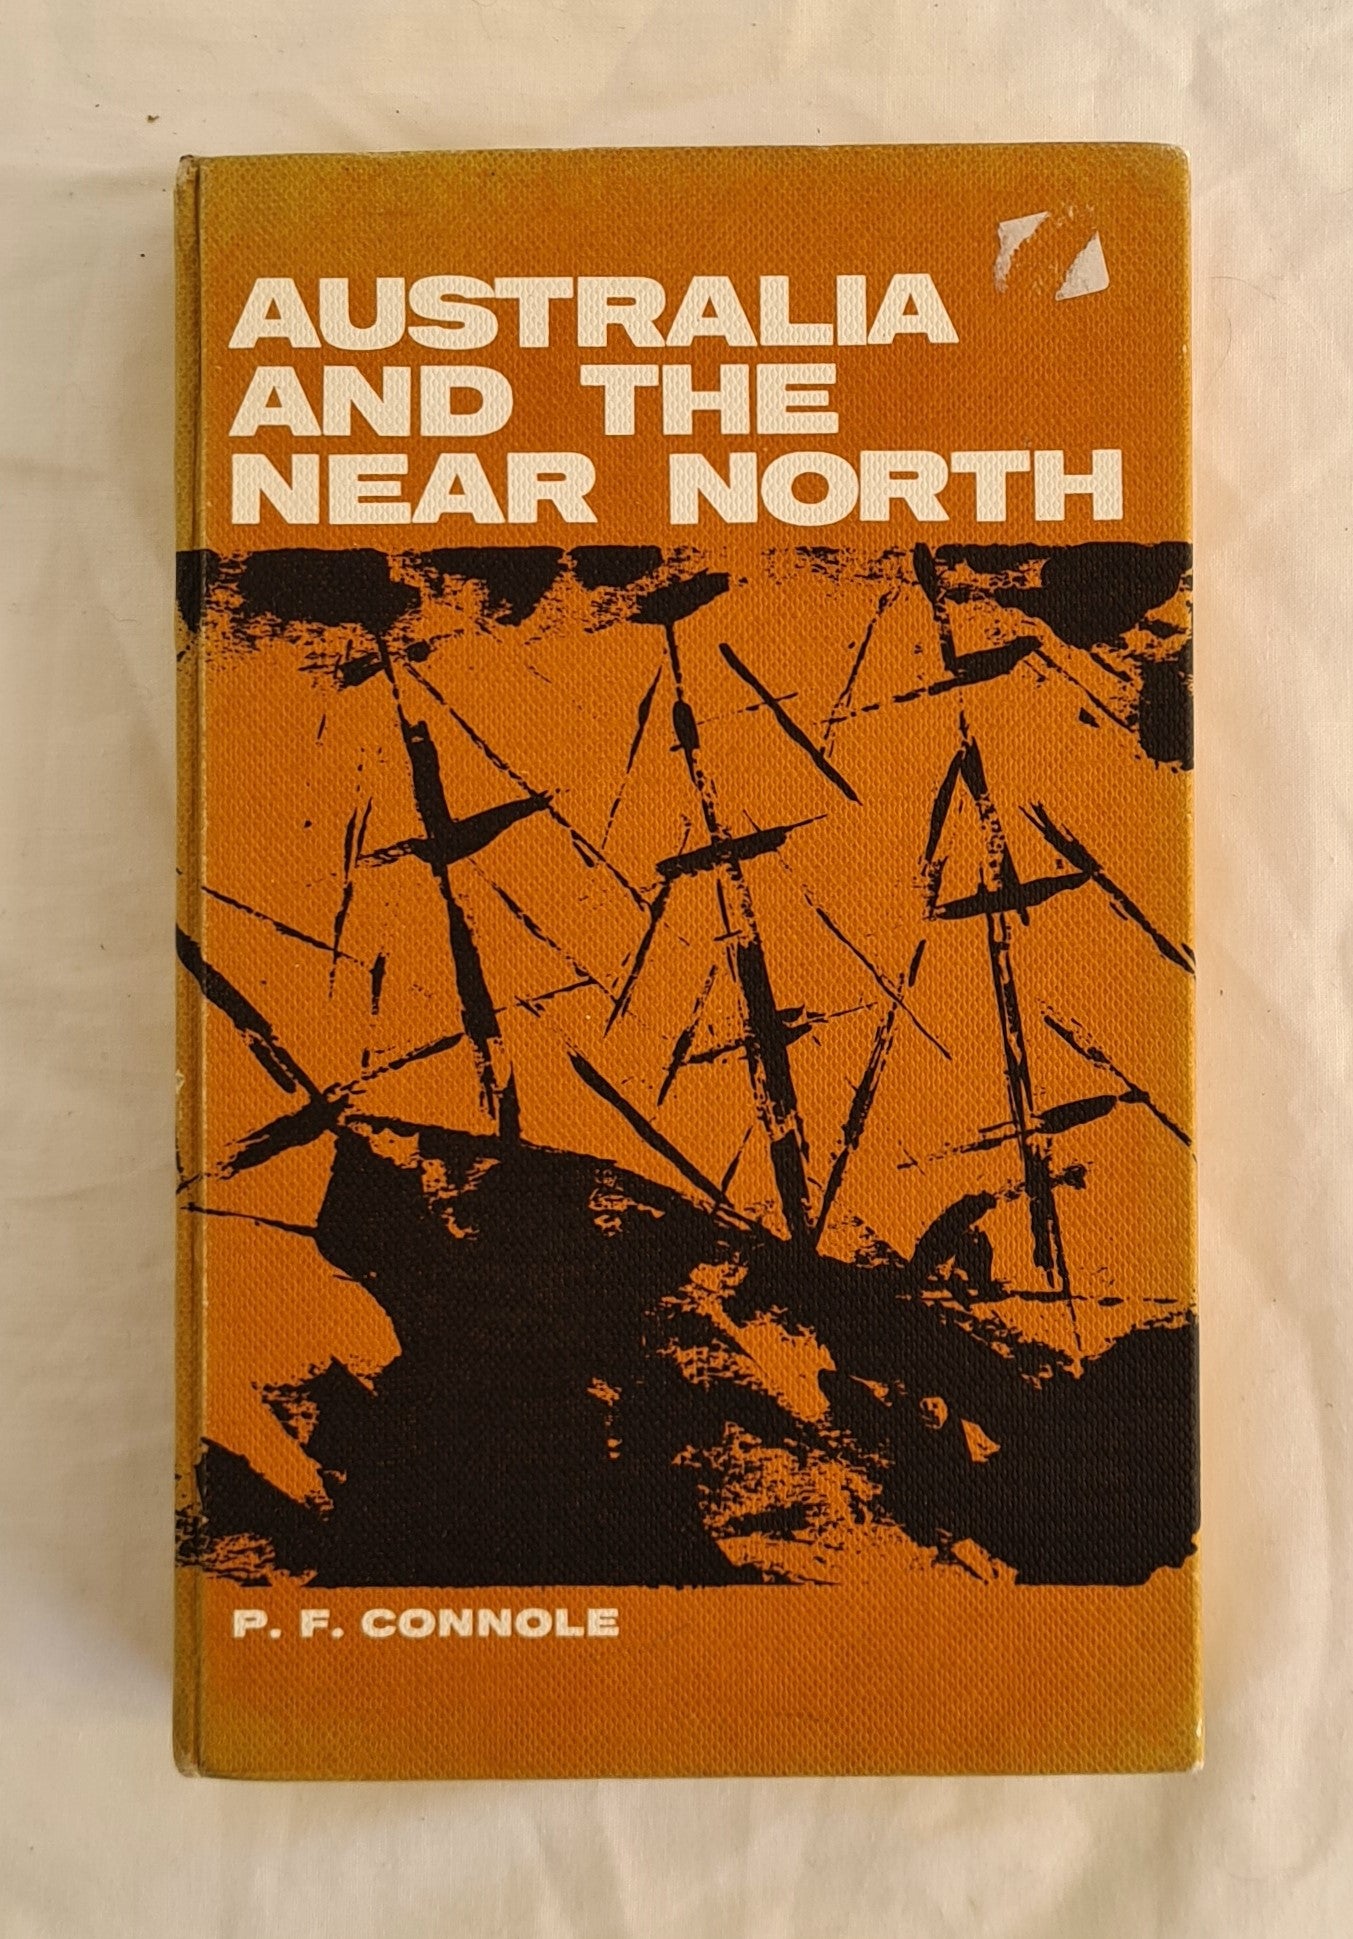 Australia and the Near North  The Commonwealth in the Modern World  Volume 2  by P. F. Connole